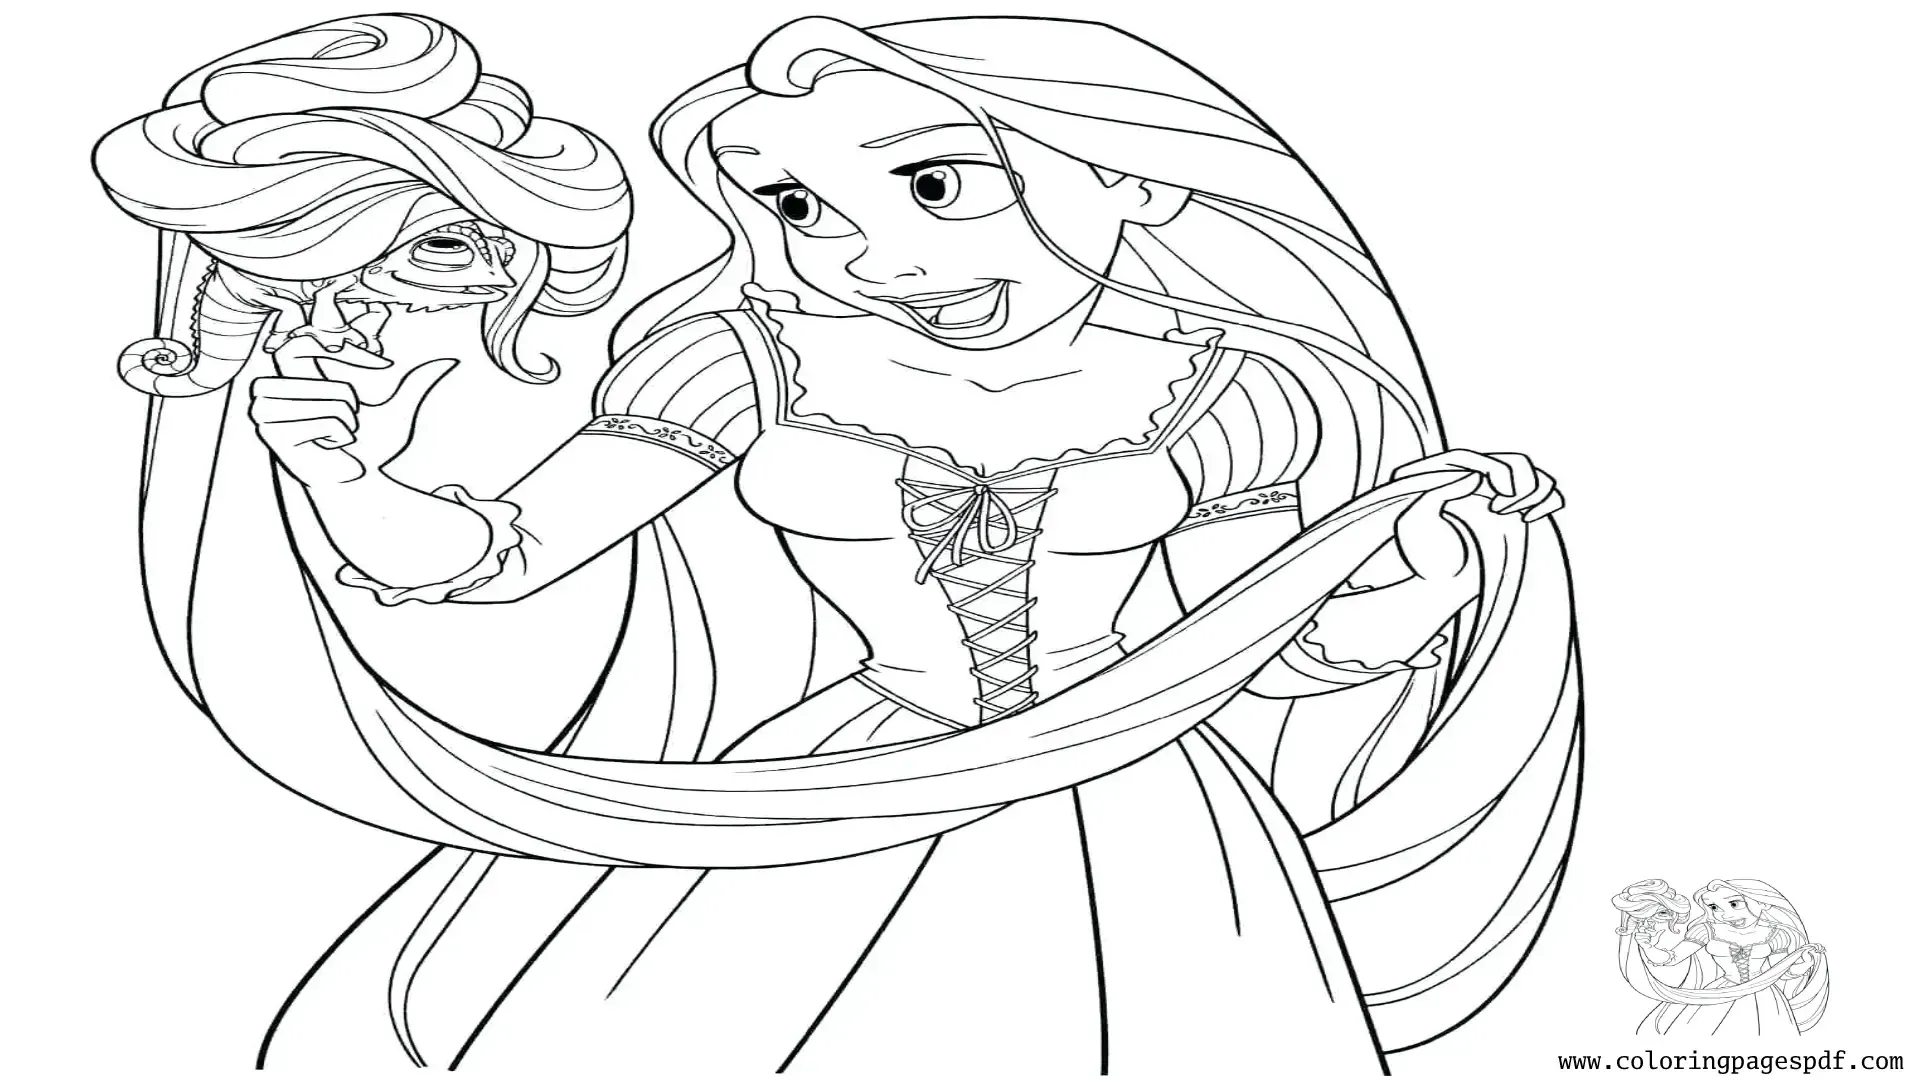 Coloring Page Of Rapunzel And Pascal